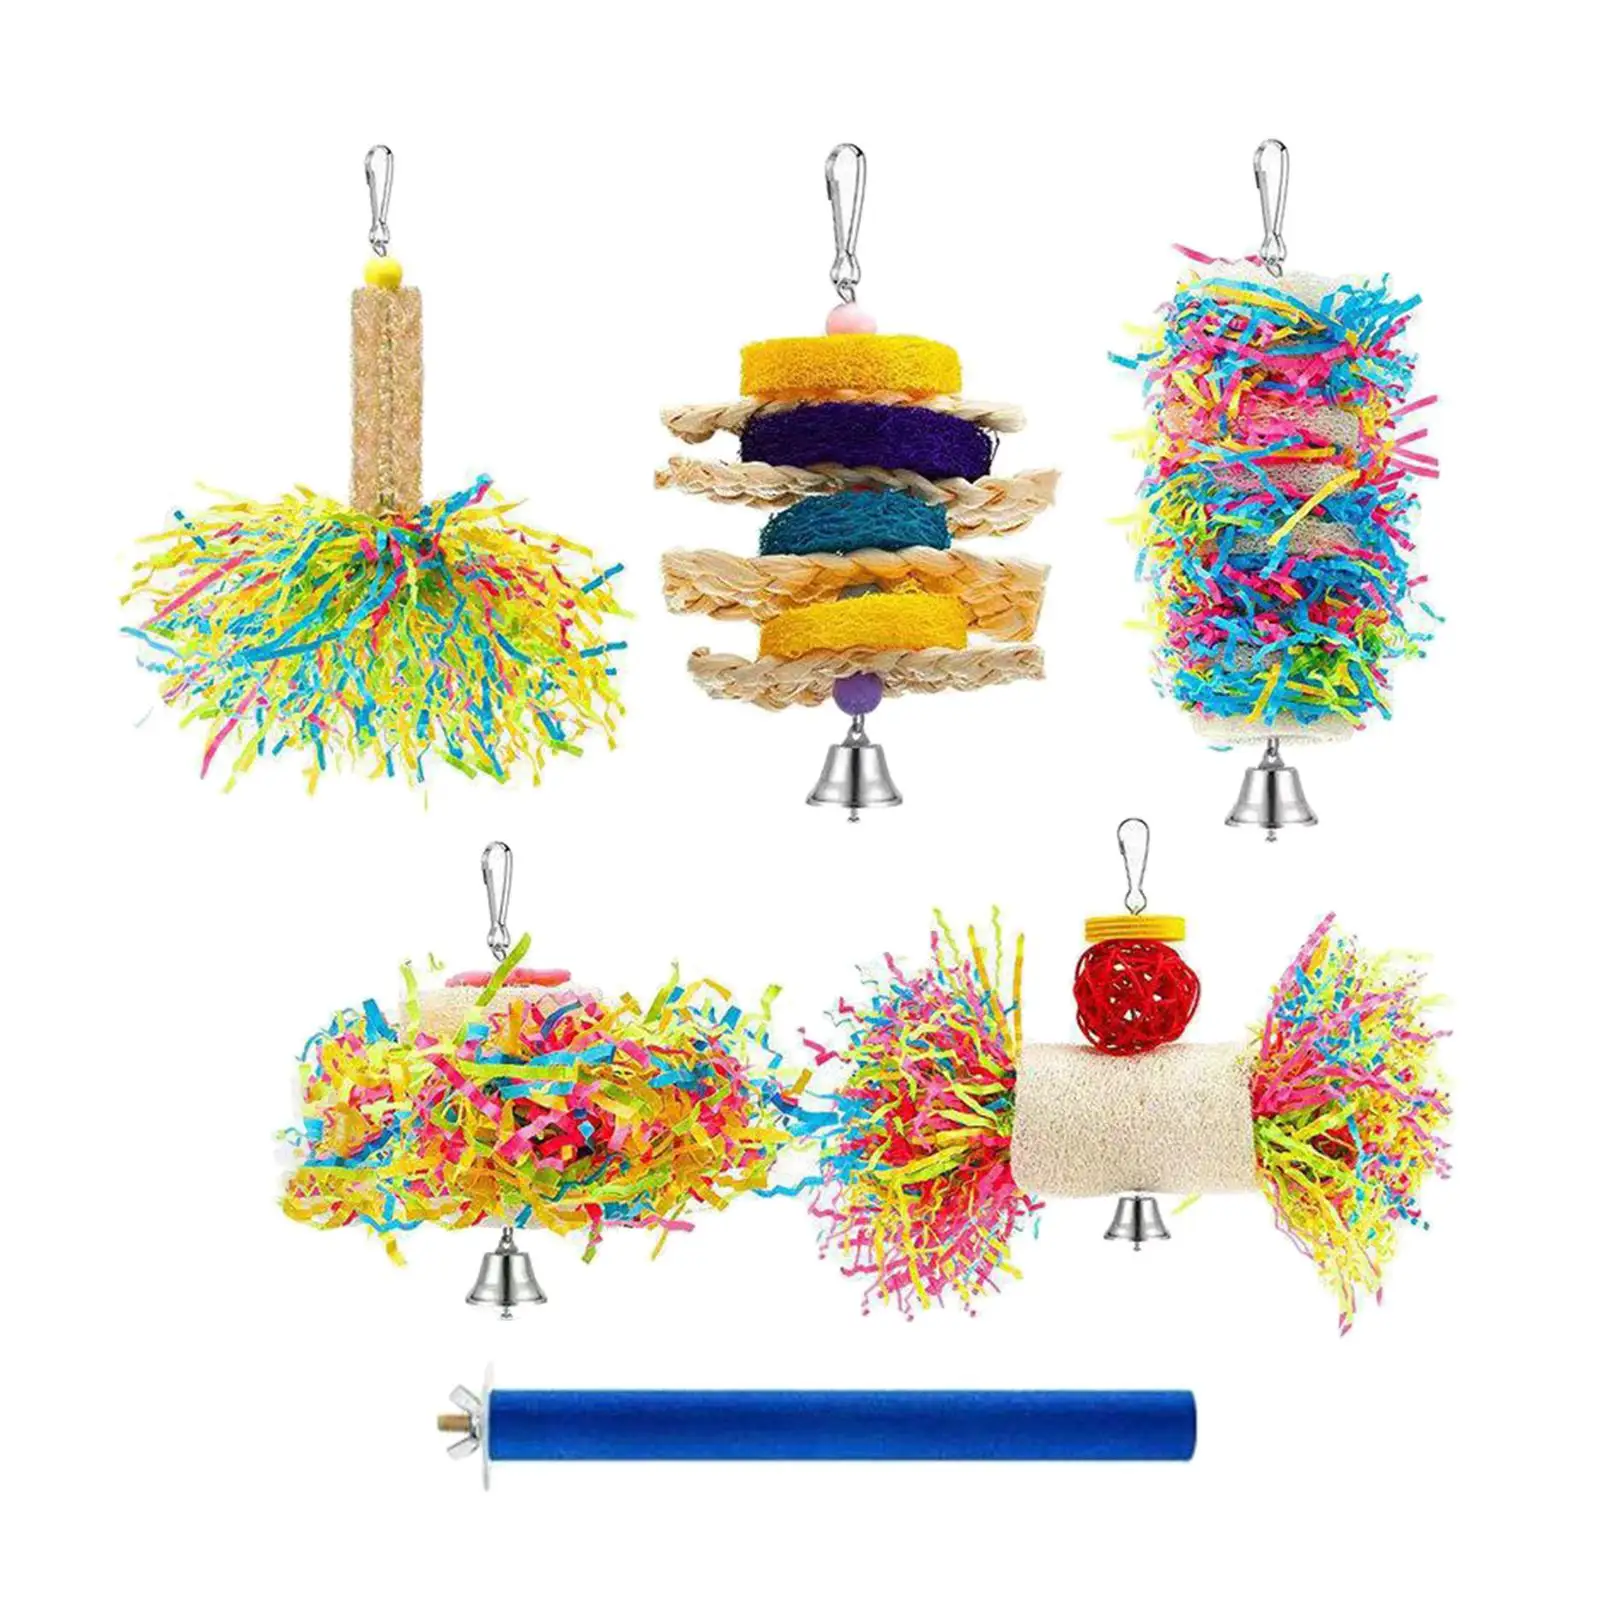 6x Parrot Cage Hanging Toys Hanging Bell Bird Toy Hammock Birds Swing Chewing for Macaws Lovebird Cockatiels Small Parakeets